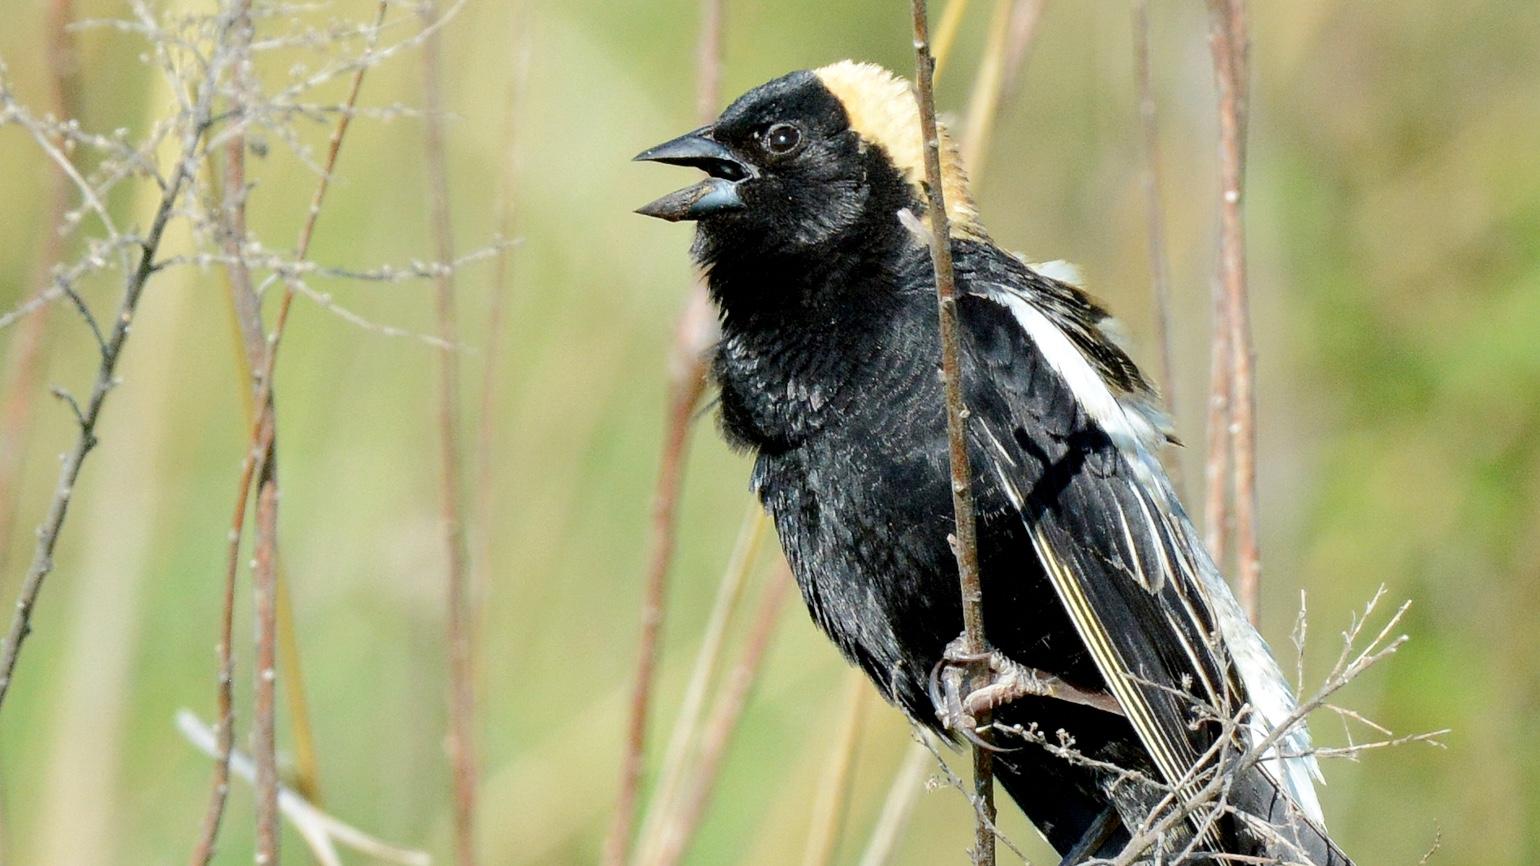 Bobolink, seen mid-song. (U.S. Fish and Wildlife Service Midwest Region)